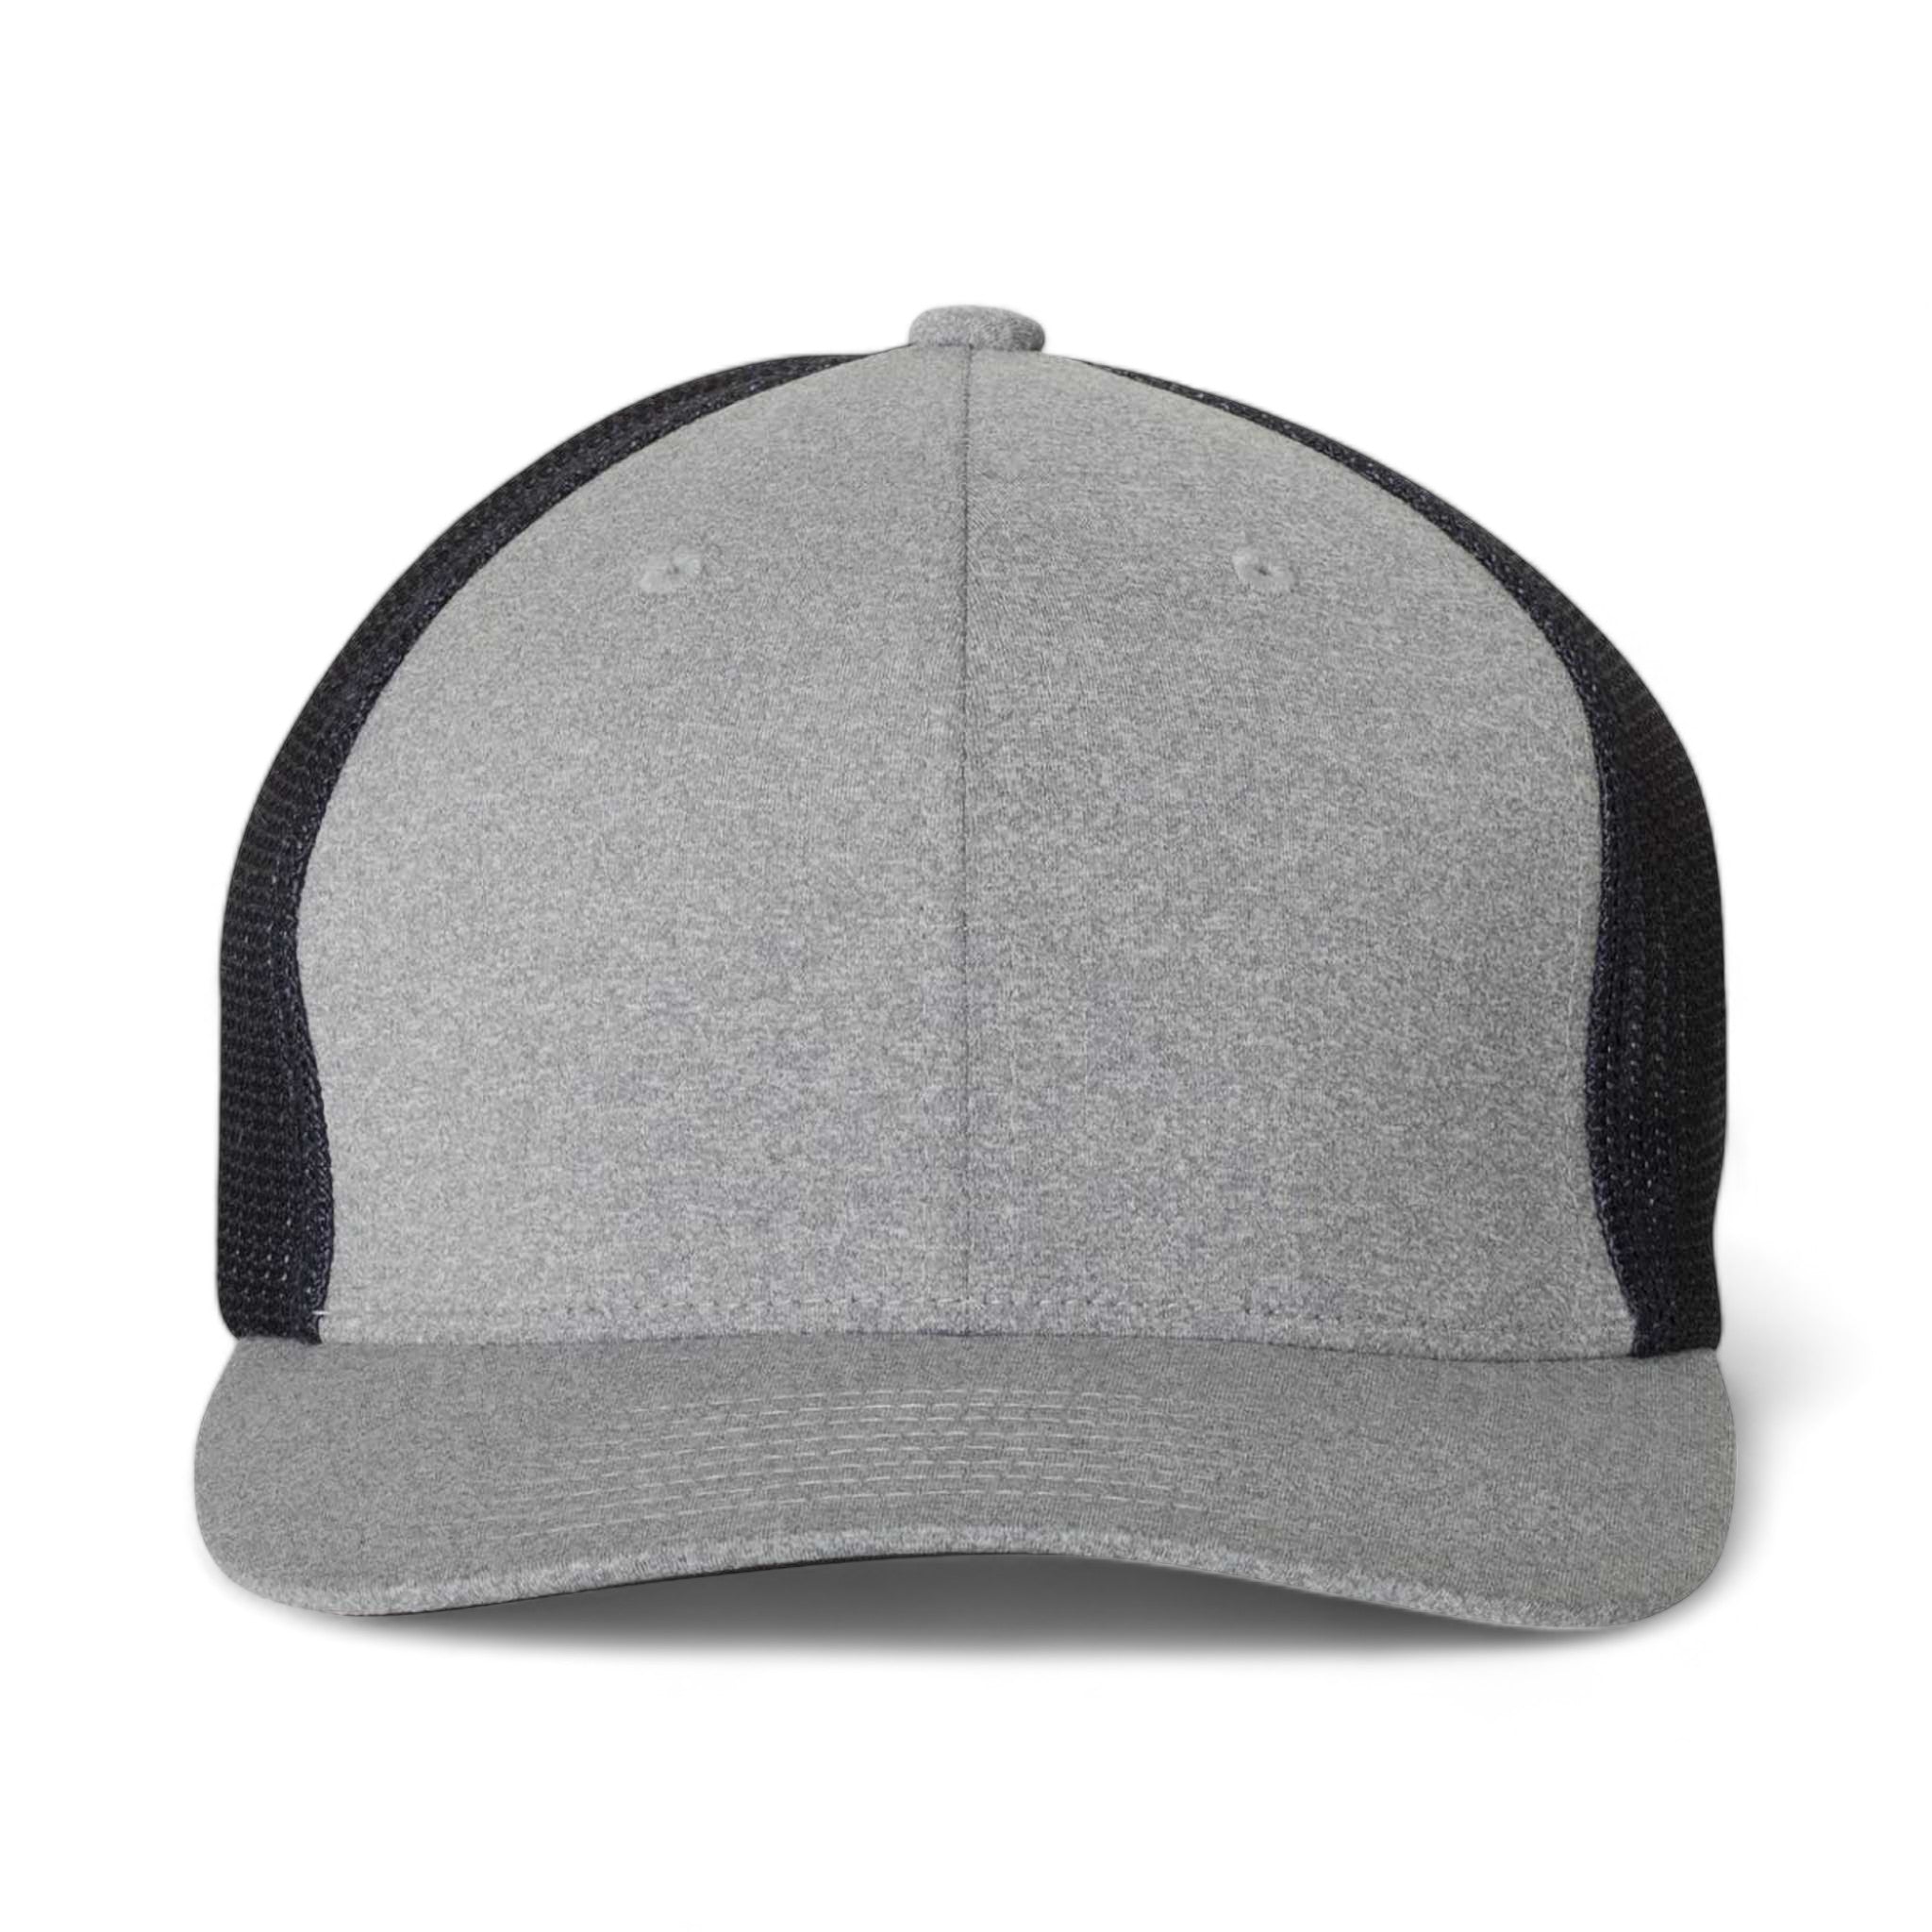 Front view of Flexfit 6311 custom hat in heather grey and navy